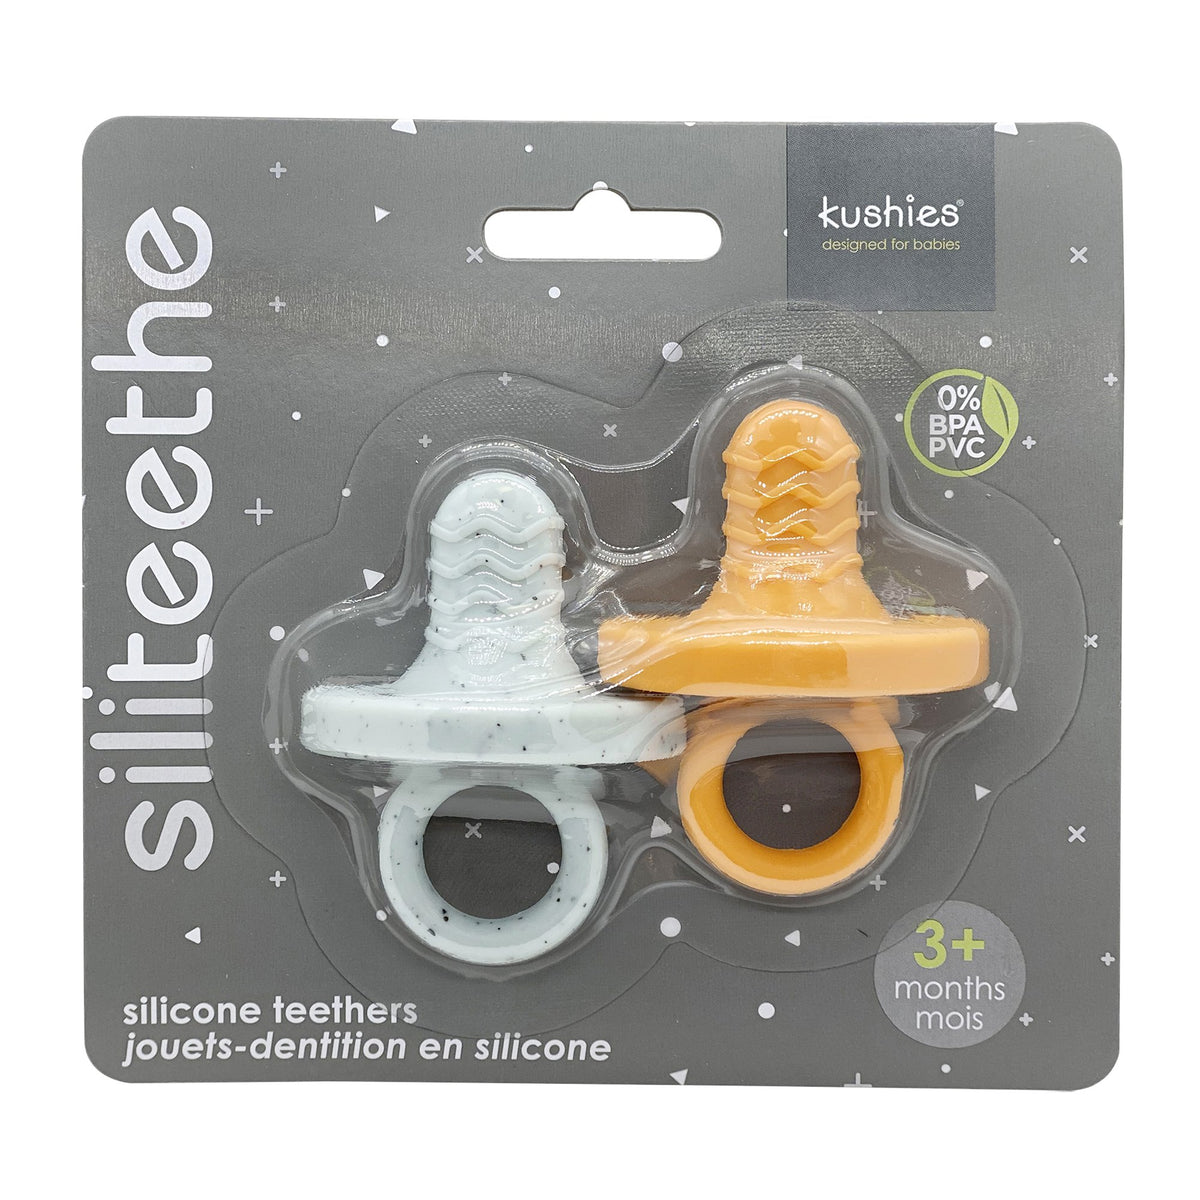 seafoam speckle and papaya baby silicone teether 2 packs packaging